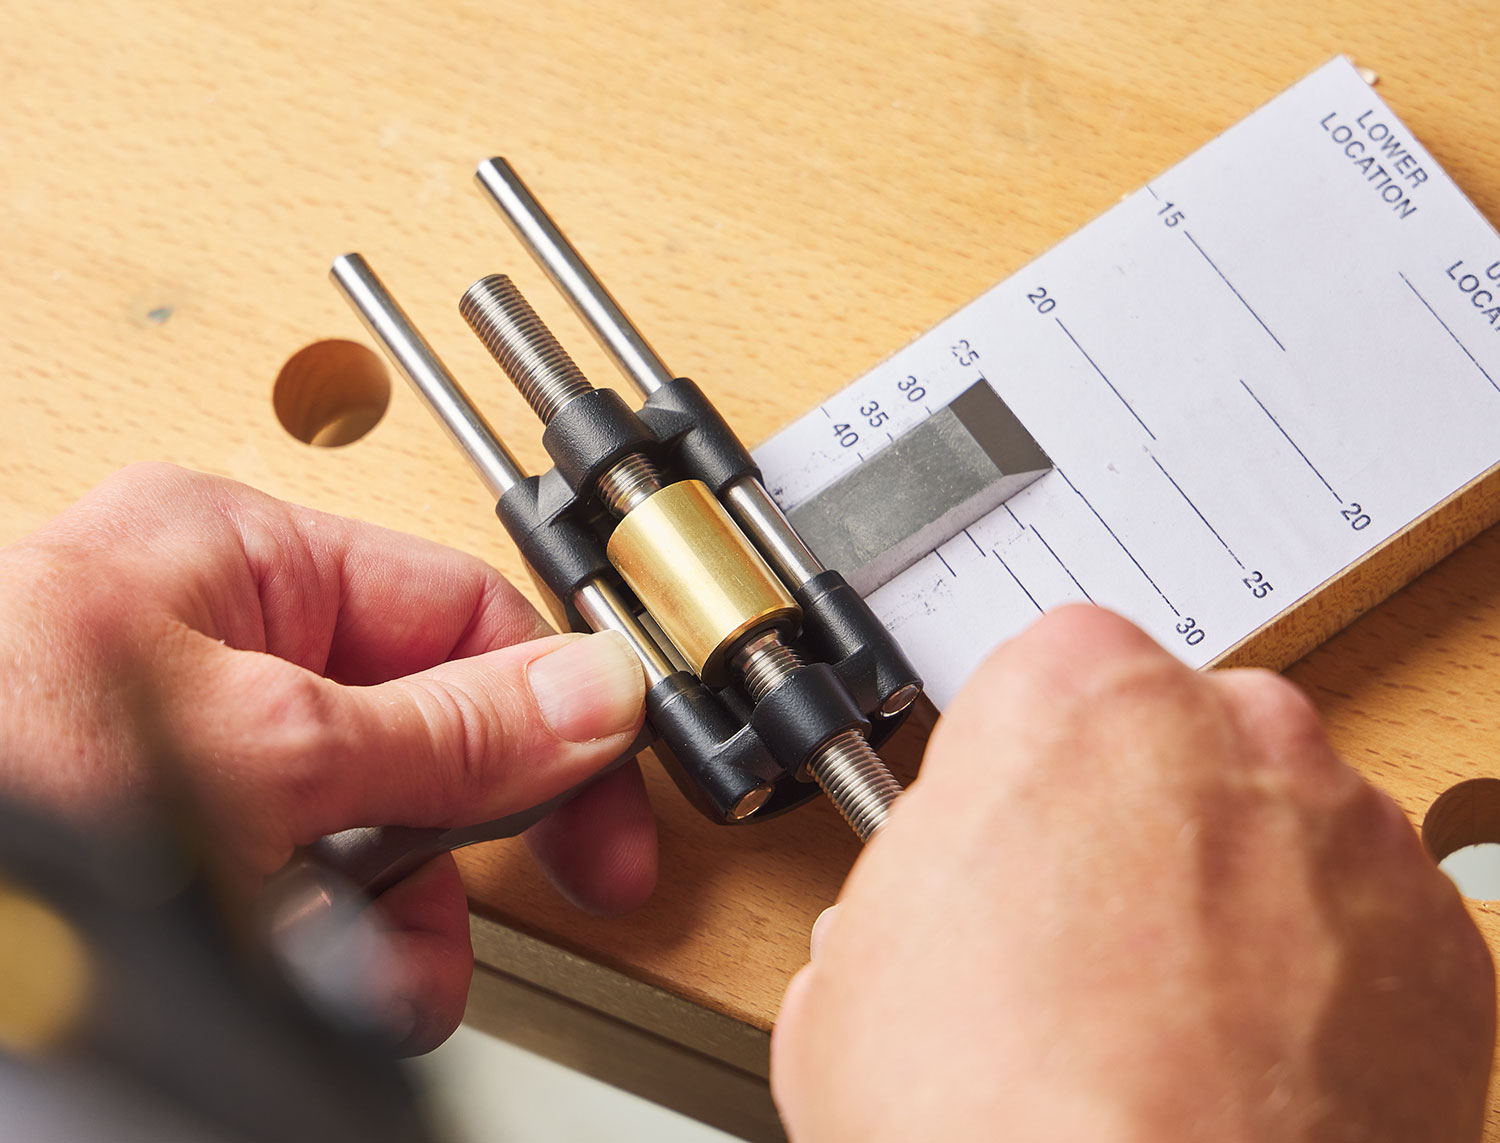 Tighten the locking knob after the tool is projected to the desired length on the template.